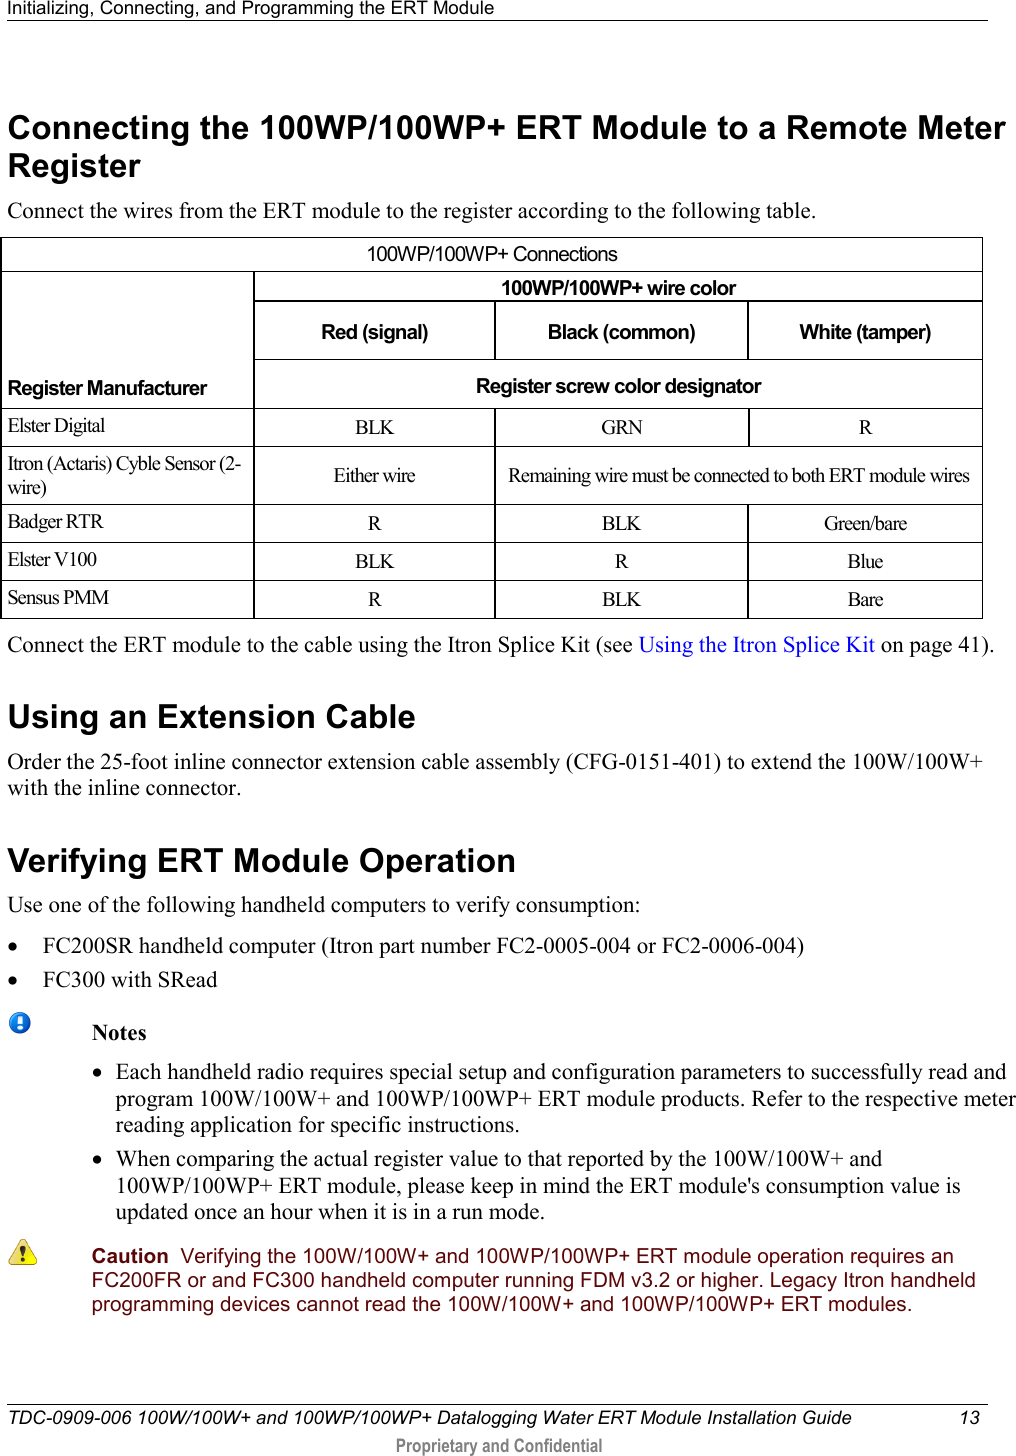 Initializing, Connecting, and Programming the ERT Module   TDC-0909-006 100W/100W+ and 100WP/100WP+ Datalogging Water ERT Module Installation Guide 13   Proprietary and Confidential     Connecting the 100WP/100WP+ ERT Module to a Remote Meter Register Connect the wires from the ERT module to the register according to the following table.  100WP/100WP+ Connections     Register Manufacturer 100WP/100WP+ wire color Red (signal) Black (common) White (tamper) Register screw color designator Elster Digital BLK GRN  R Itron (Actaris) Cyble Sensor (2-wire) Either wire Remaining wire must be connected to both ERT module wires Badger RTR R  BLK Green/bare Elster V100 BLK  R  Blue Sensus PMM R  BLK Bare Connect the ERT module to the cable using the Itron Splice Kit (see Using the Itron Splice Kit on page 41).  Using an Extension Cable Order the 25-foot inline connector extension cable assembly (CFG-0151-401) to extend the 100W/100W+ with the inline connector.    Verifying ERT Module Operation Use one of the following handheld computers to verify consumption: • FC200SR handheld computer (Itron part number FC2-0005-004 or FC2-0006-004) • FC300 with SRead   Notes • Each handheld radio requires special setup and configuration parameters to successfully read and program 100W/100W+ and 100WP/100WP+ ERT module products. Refer to the respective meter reading application for specific instructions. • When comparing the actual register value to that reported by the 100W/100W+ and 100WP/100WP+ ERT module, please keep in mind the ERT module&apos;s consumption value is updated once an hour when it is in a run mode.   Caution  Verifying the 100W/100W+ and 100WP/100WP+ ERT module operation requires an FC200FR or and FC300 handheld computer running FDM v3.2 or higher. Legacy Itron handheld programming devices cannot read the 100W/100W+ and 100WP/100WP+ ERT modules.    